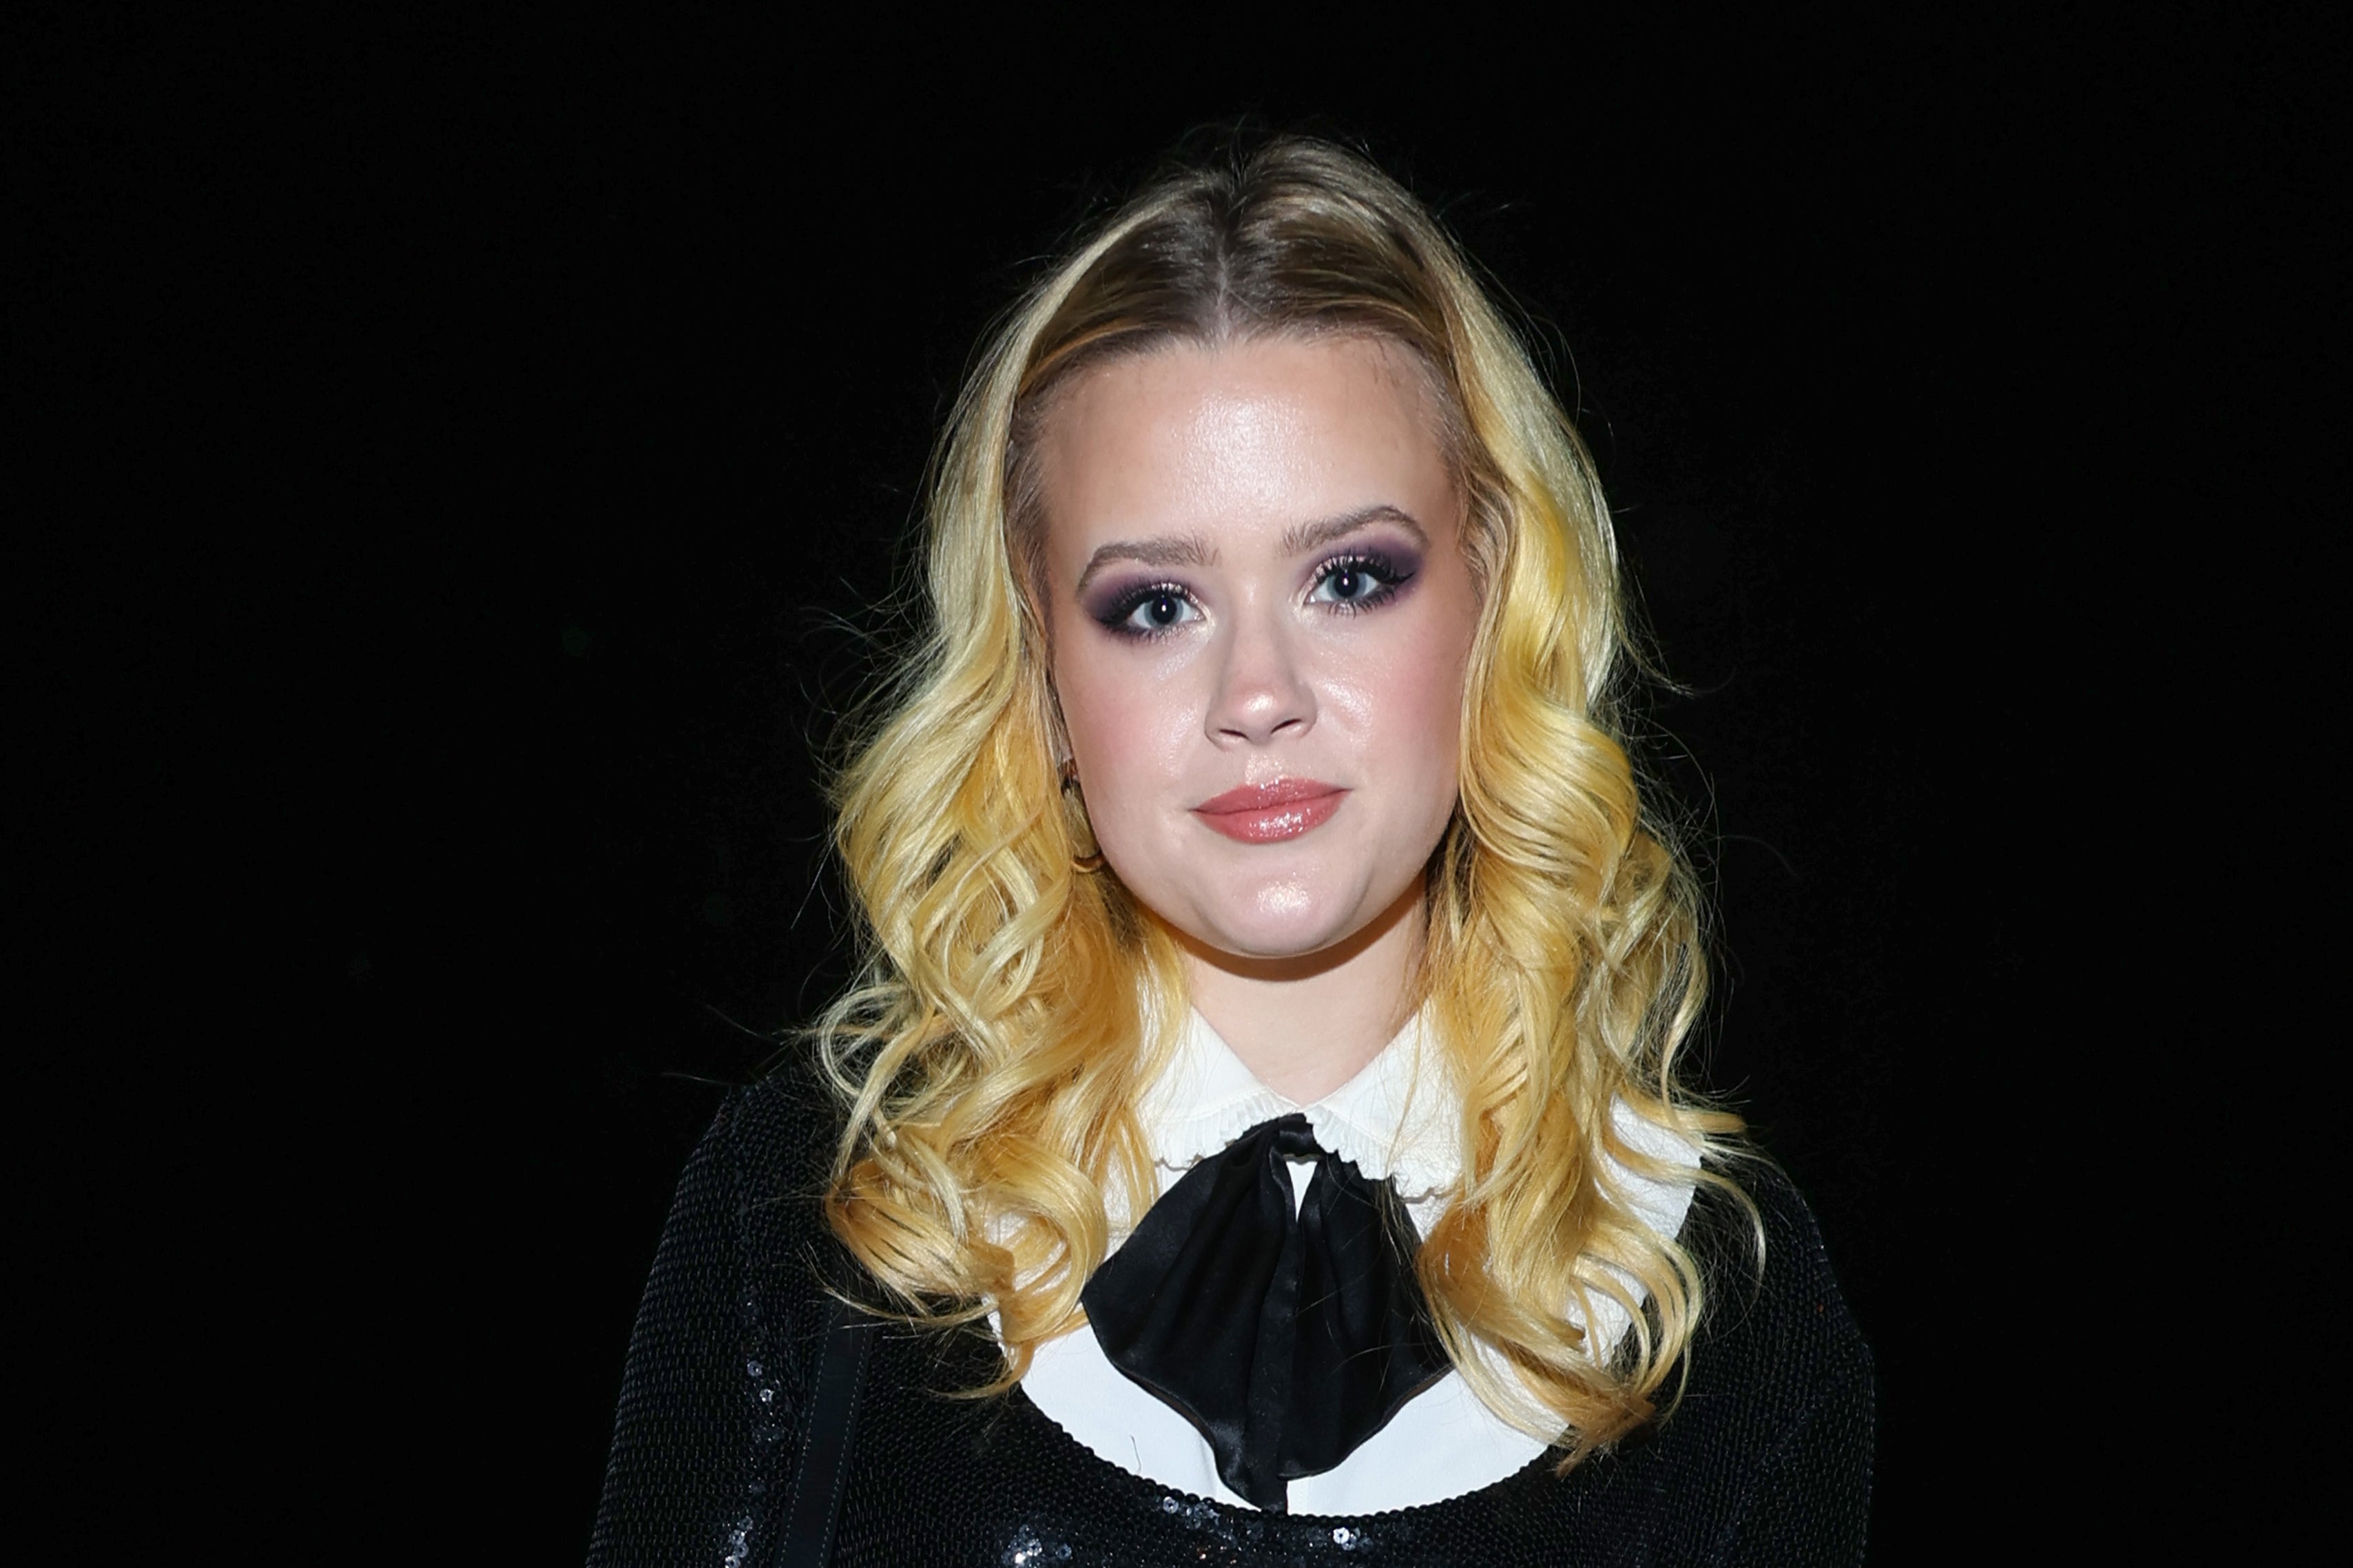 Ava Phillippe, Reese Witherspoon's Daughter, Responded To People Saying She Should Take Ozempic